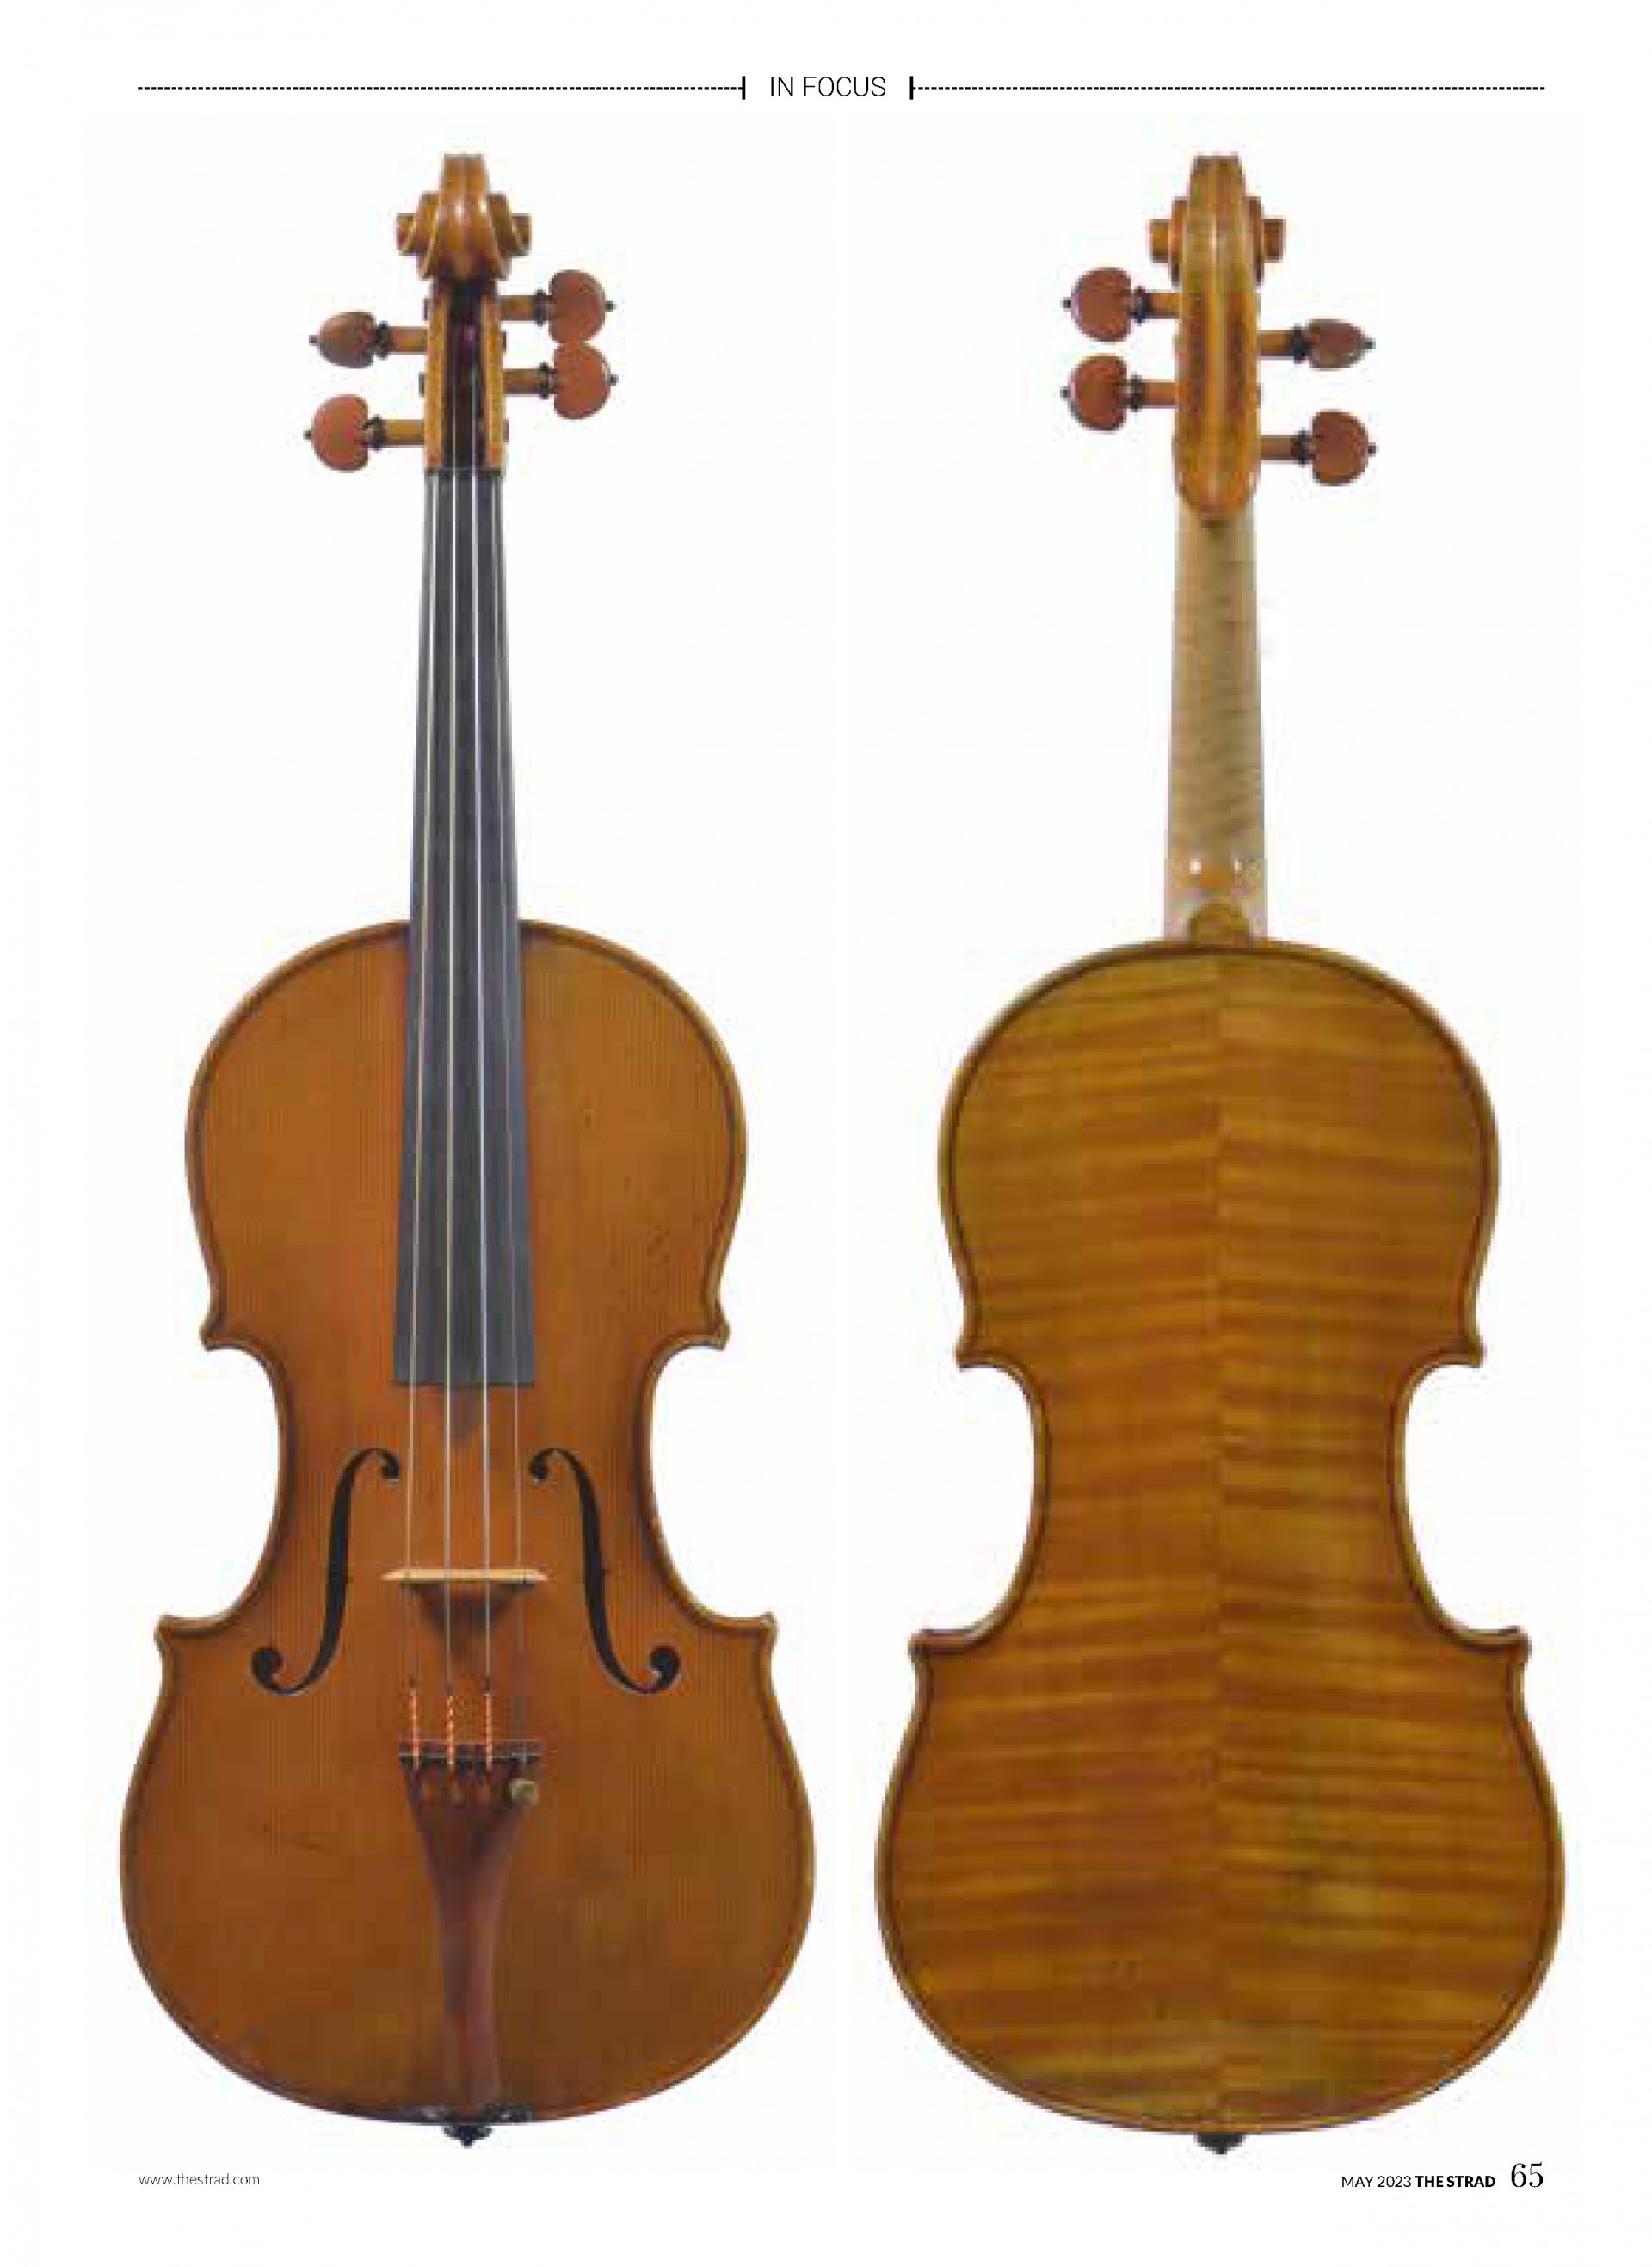 Stradivarius violin is top lot at Beare's first online auction